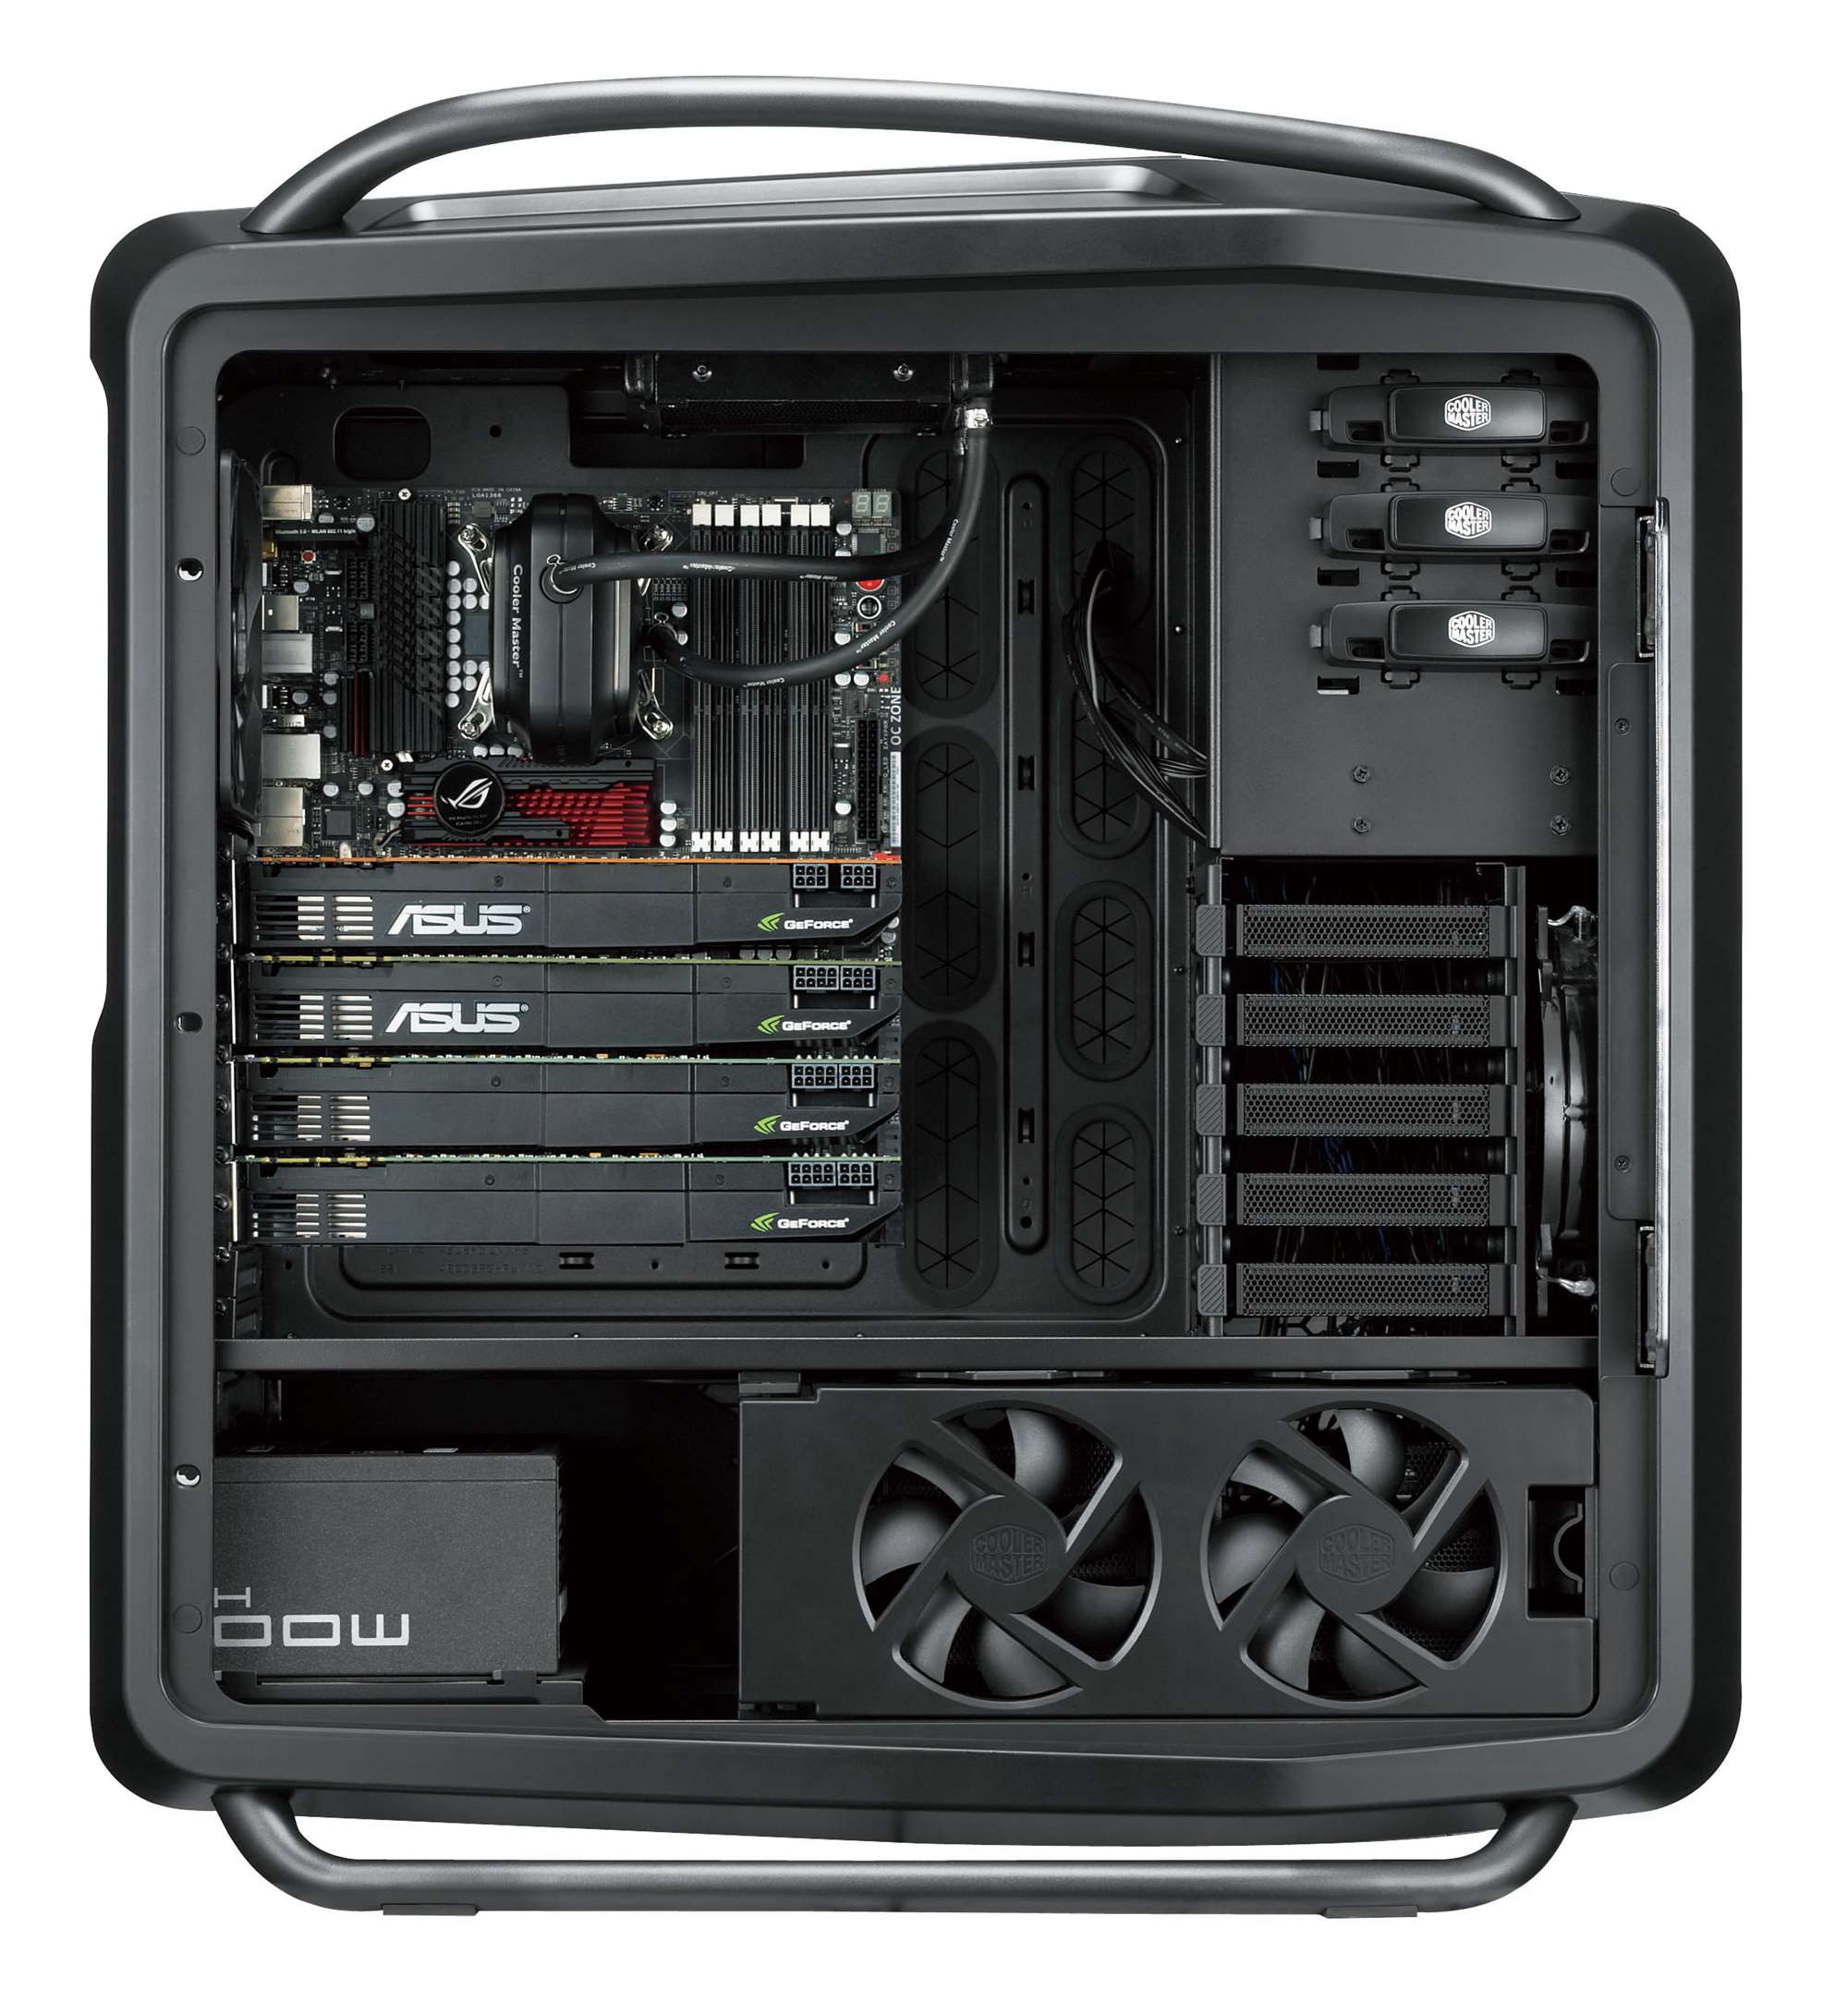 Cooler Master Cosmos 2 Club Page 606 Overclock Net An